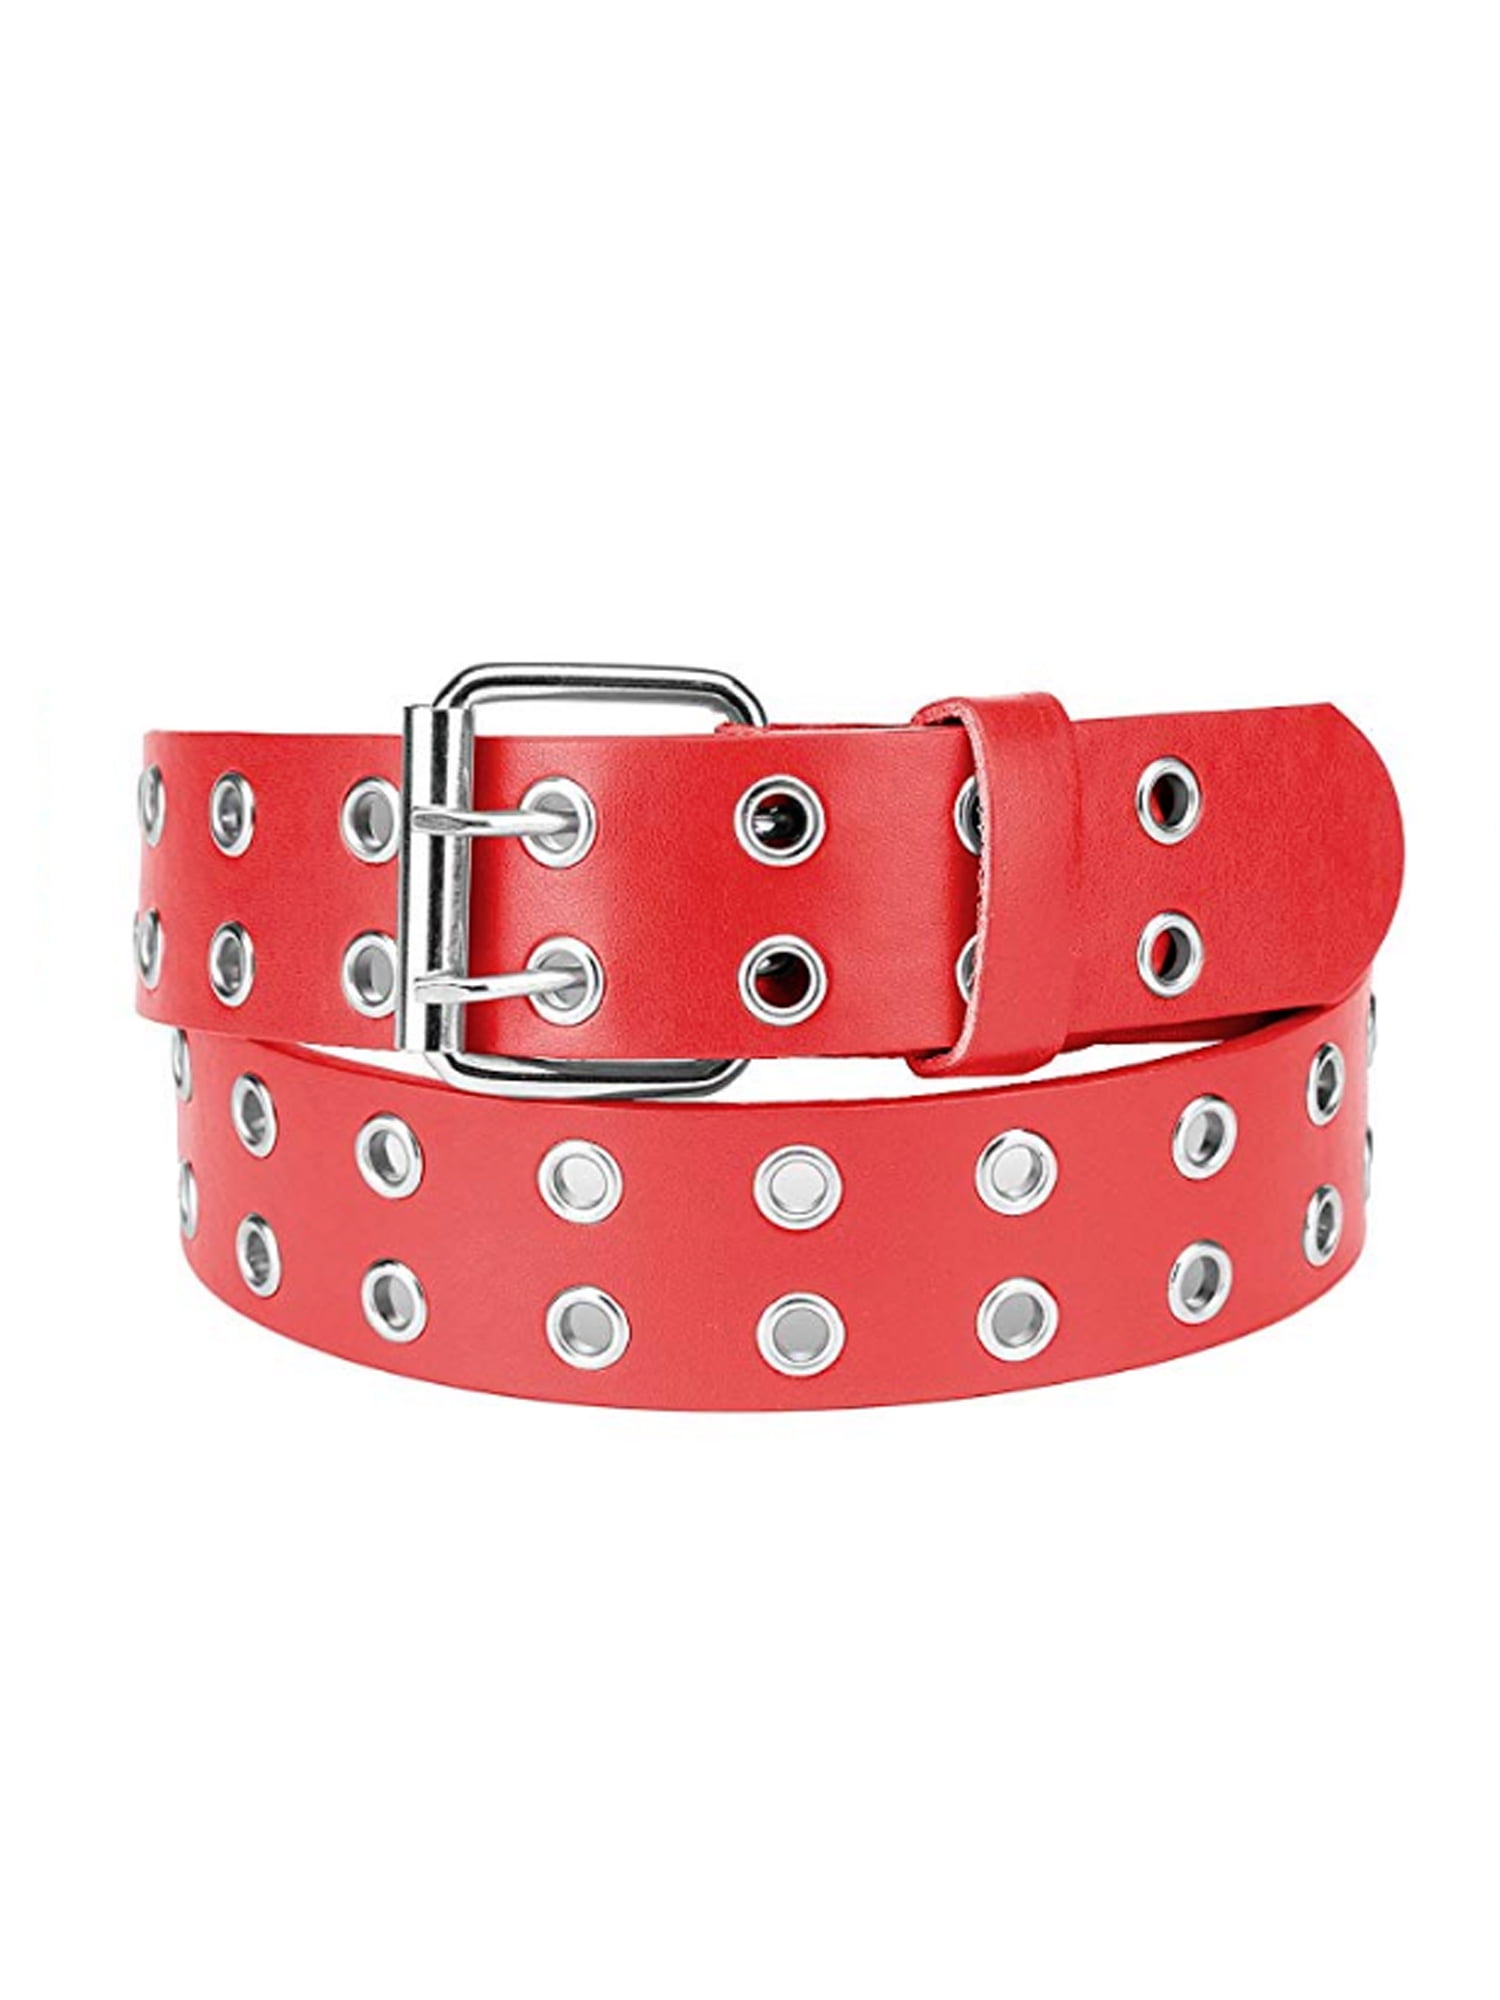 Eurosport Solid Rich Fashion Color Double Grommet Belt - BW9915A - Red ...